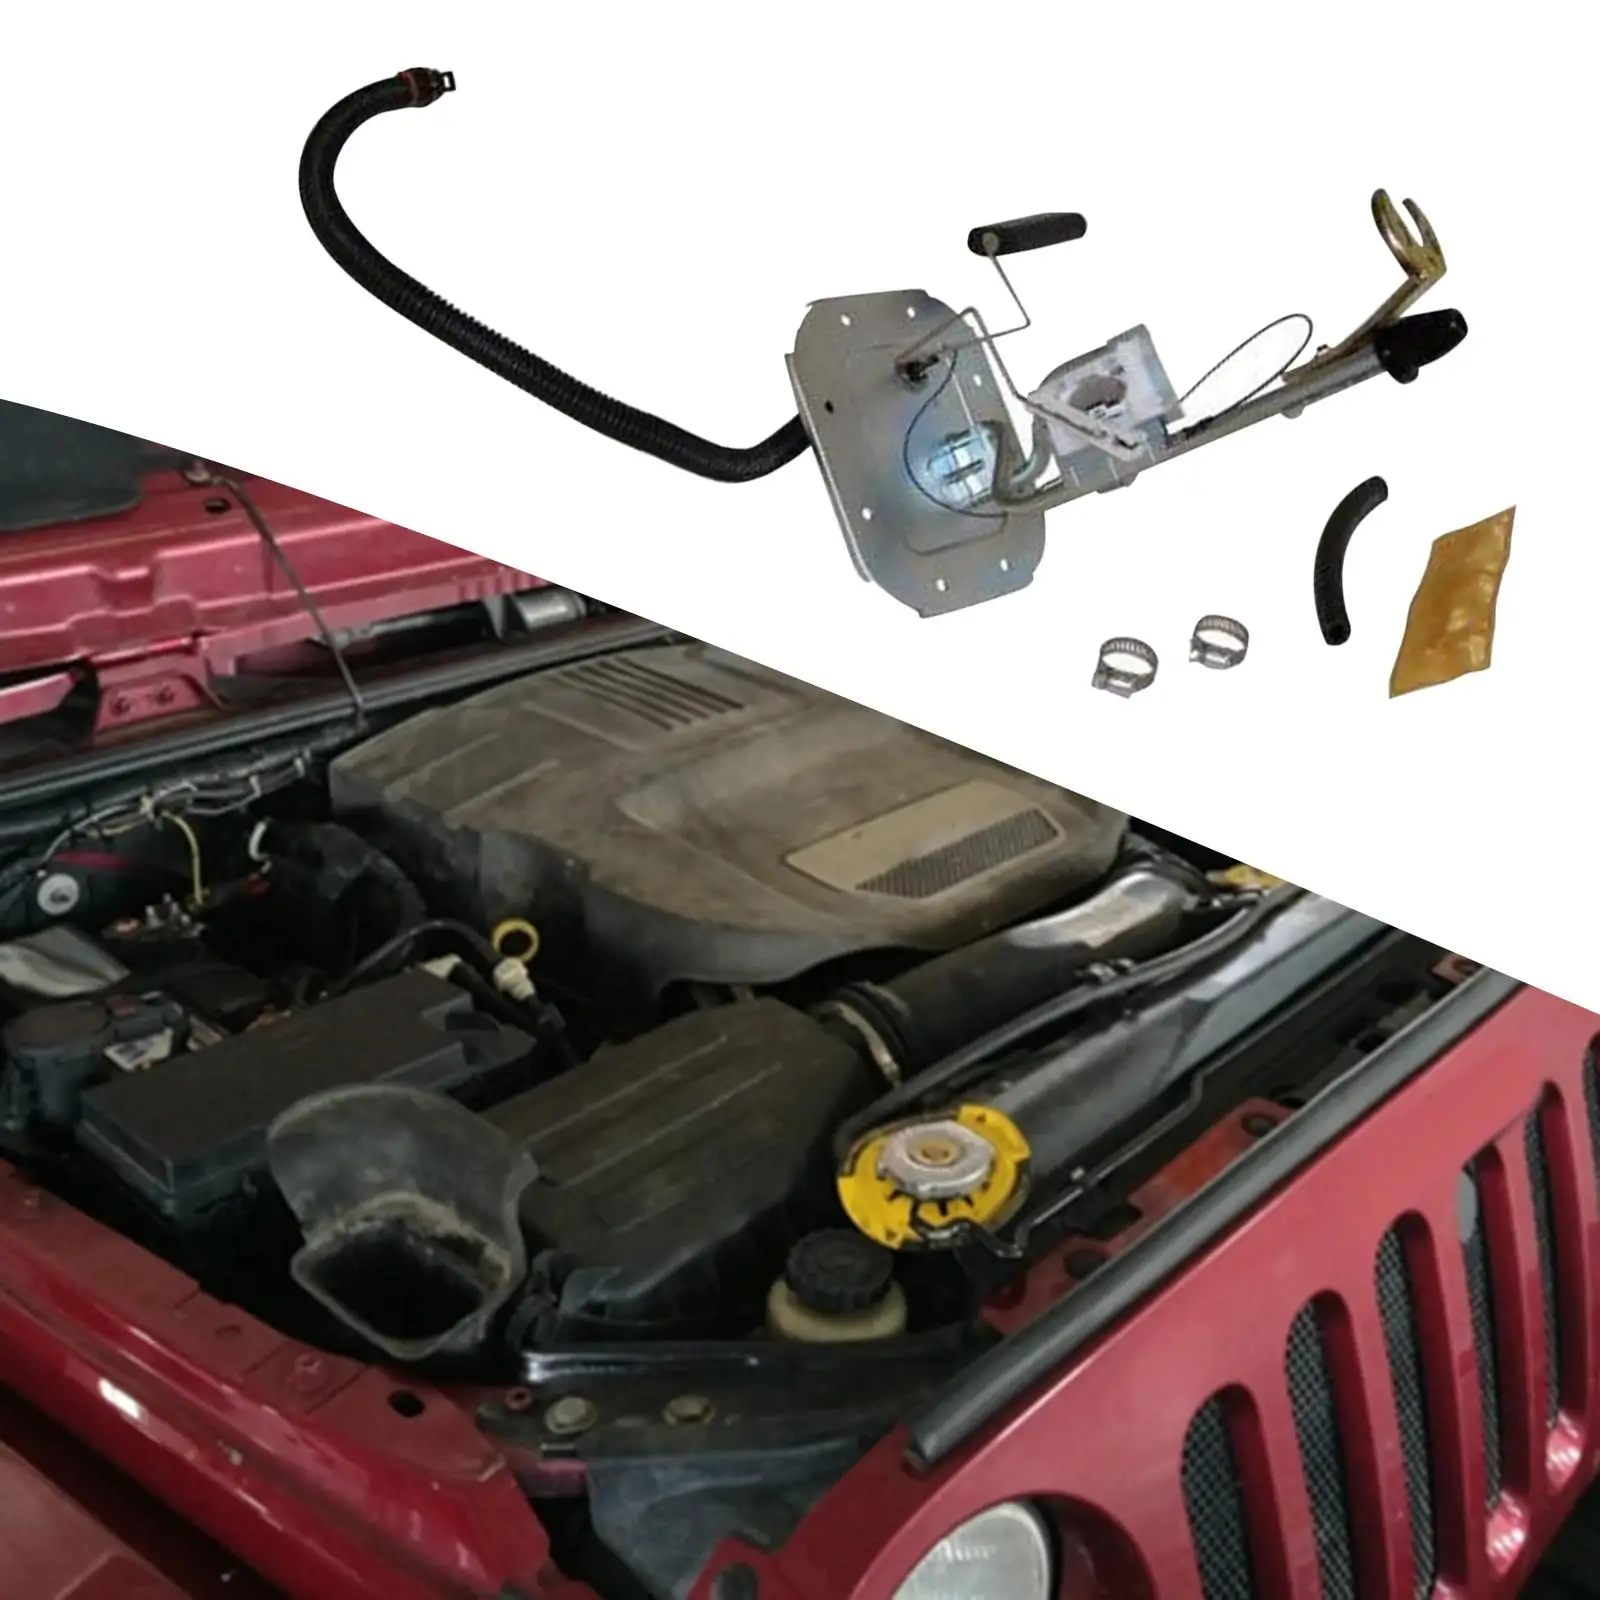 Fuel Level Sending Unit Replaces 53003341x Durable Assembly for Yj